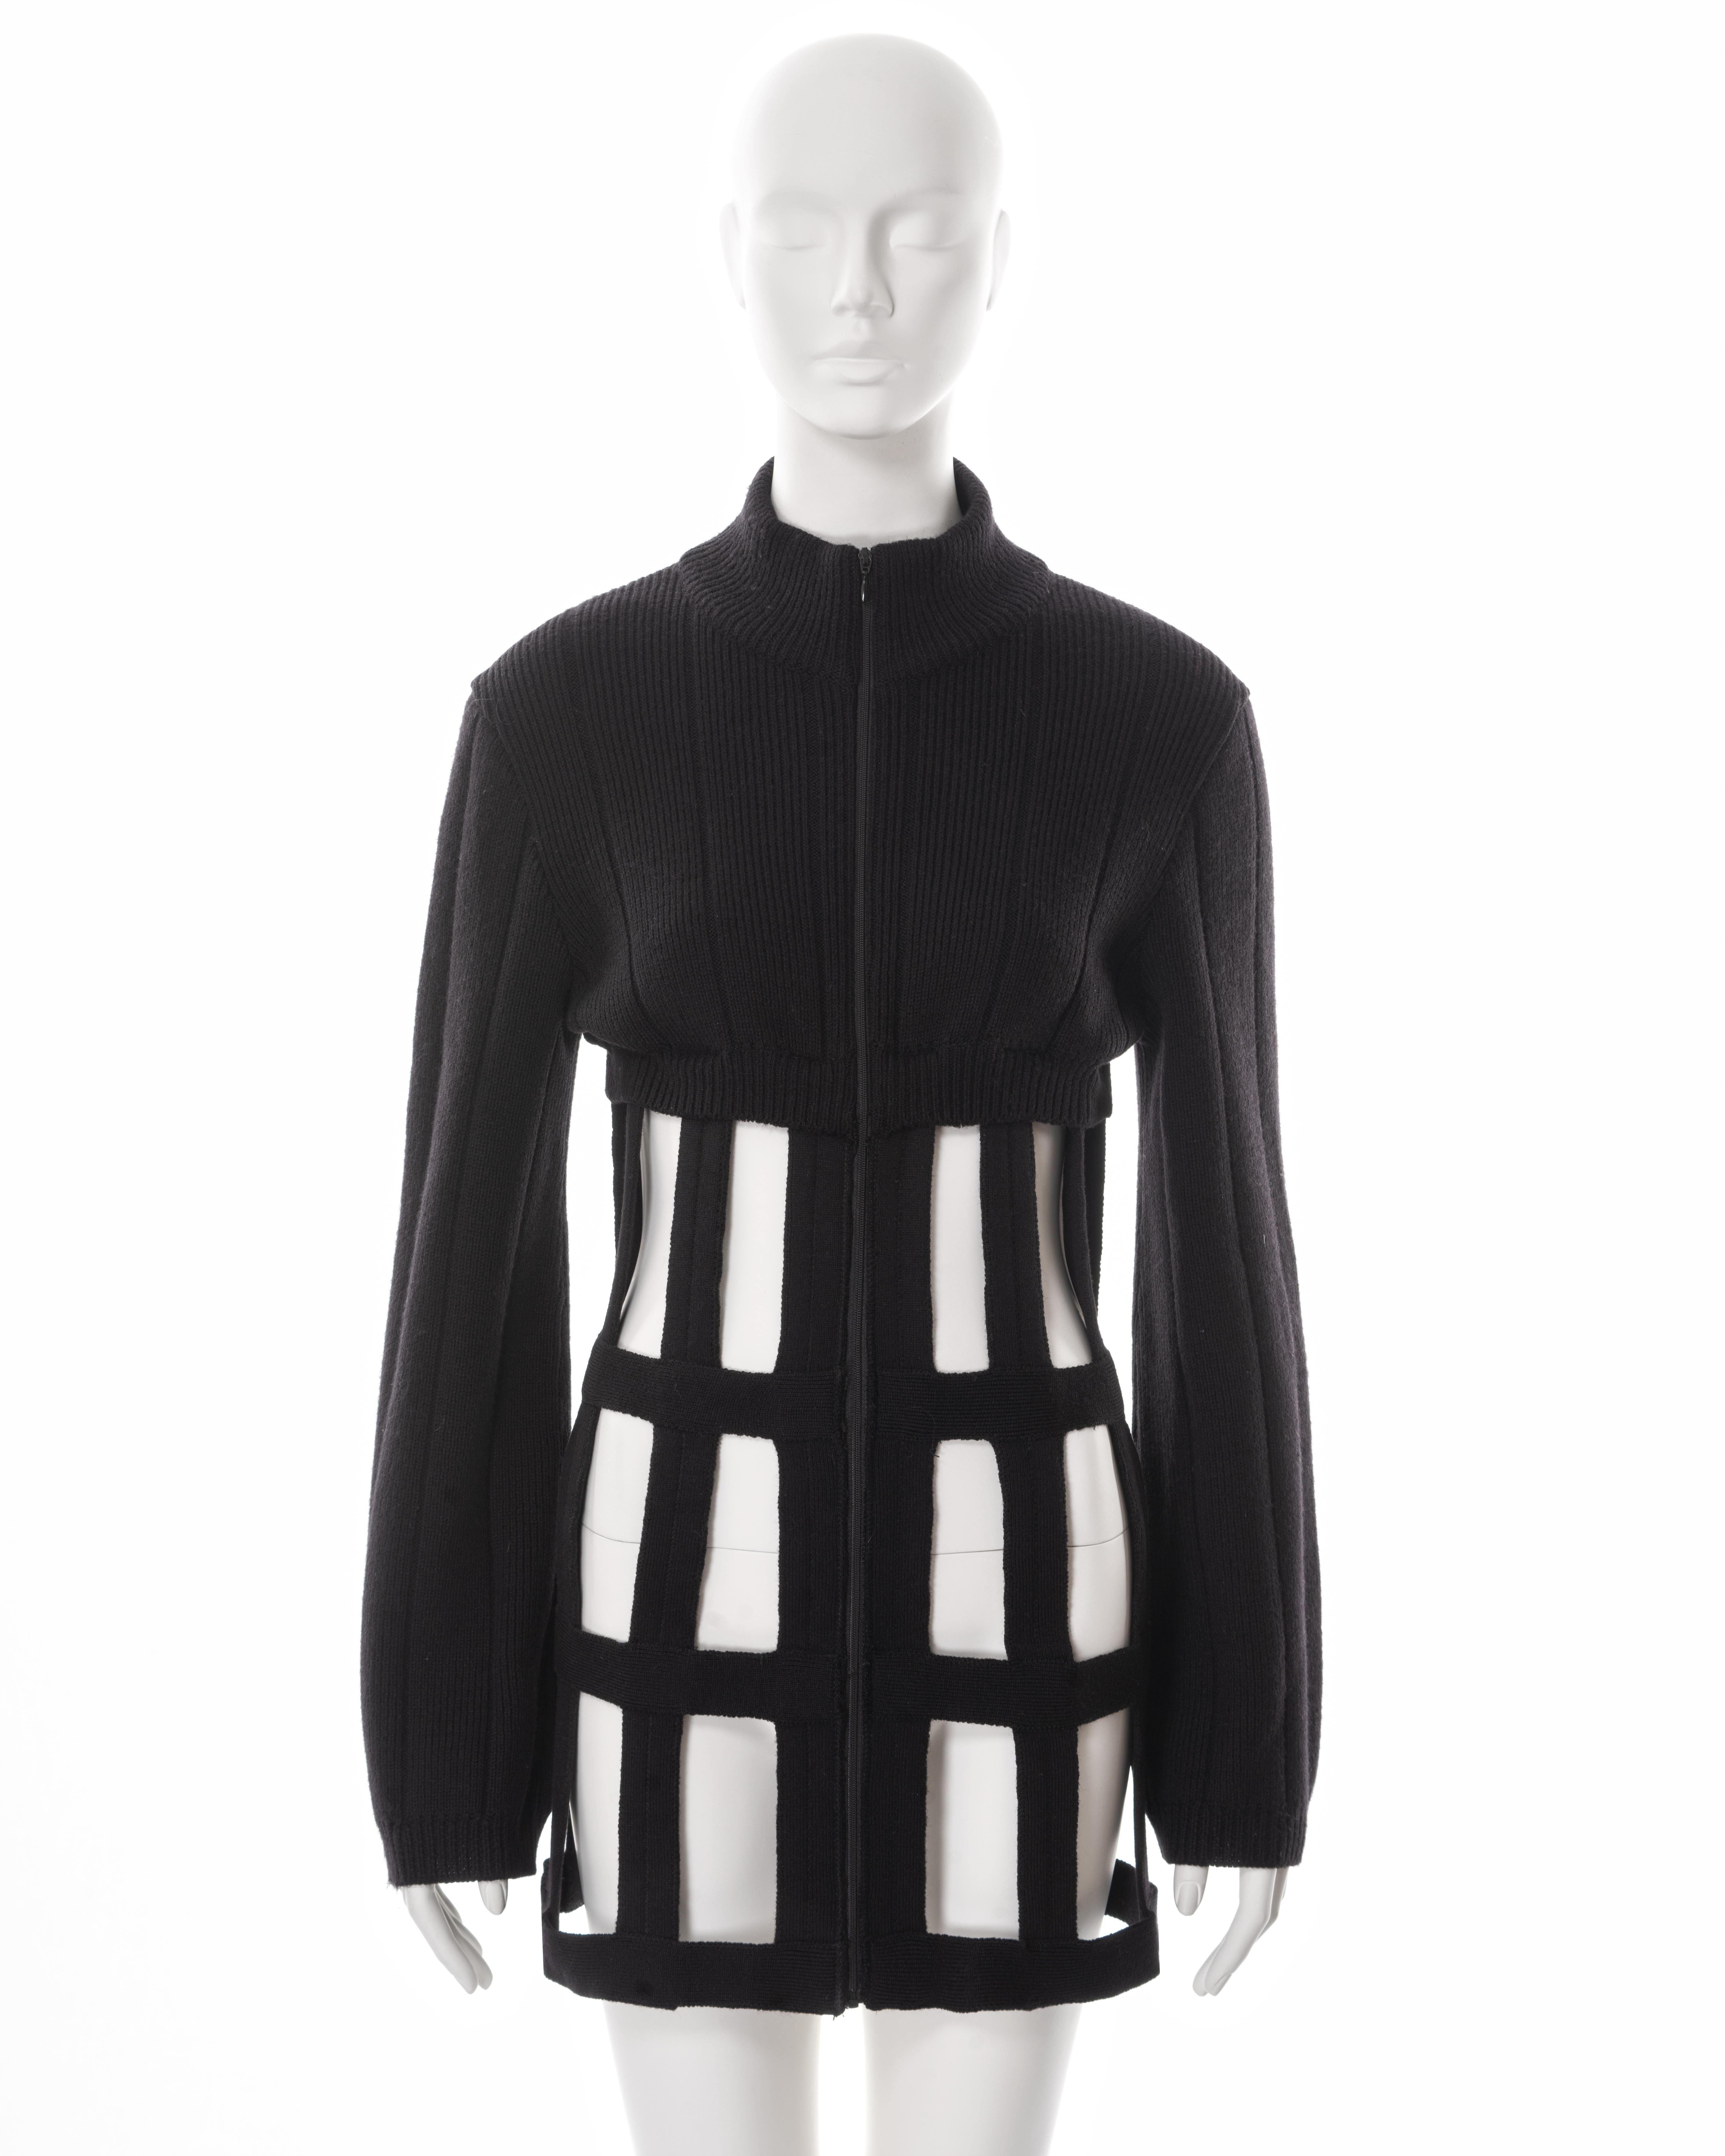 ▪ Jean Paul Gaultier sweater dress
▪ Sold by One of a Kind Archive
▪ Fall-Winter 1989
▪ Constructed from black ribbed-knit wool 
▪ Turtle neck 
▪ Caged skirt made up of a lattice of corset boning 
▪ Centre-front zipper 
▪ Long sleeves 
▪ IT 42 - FR